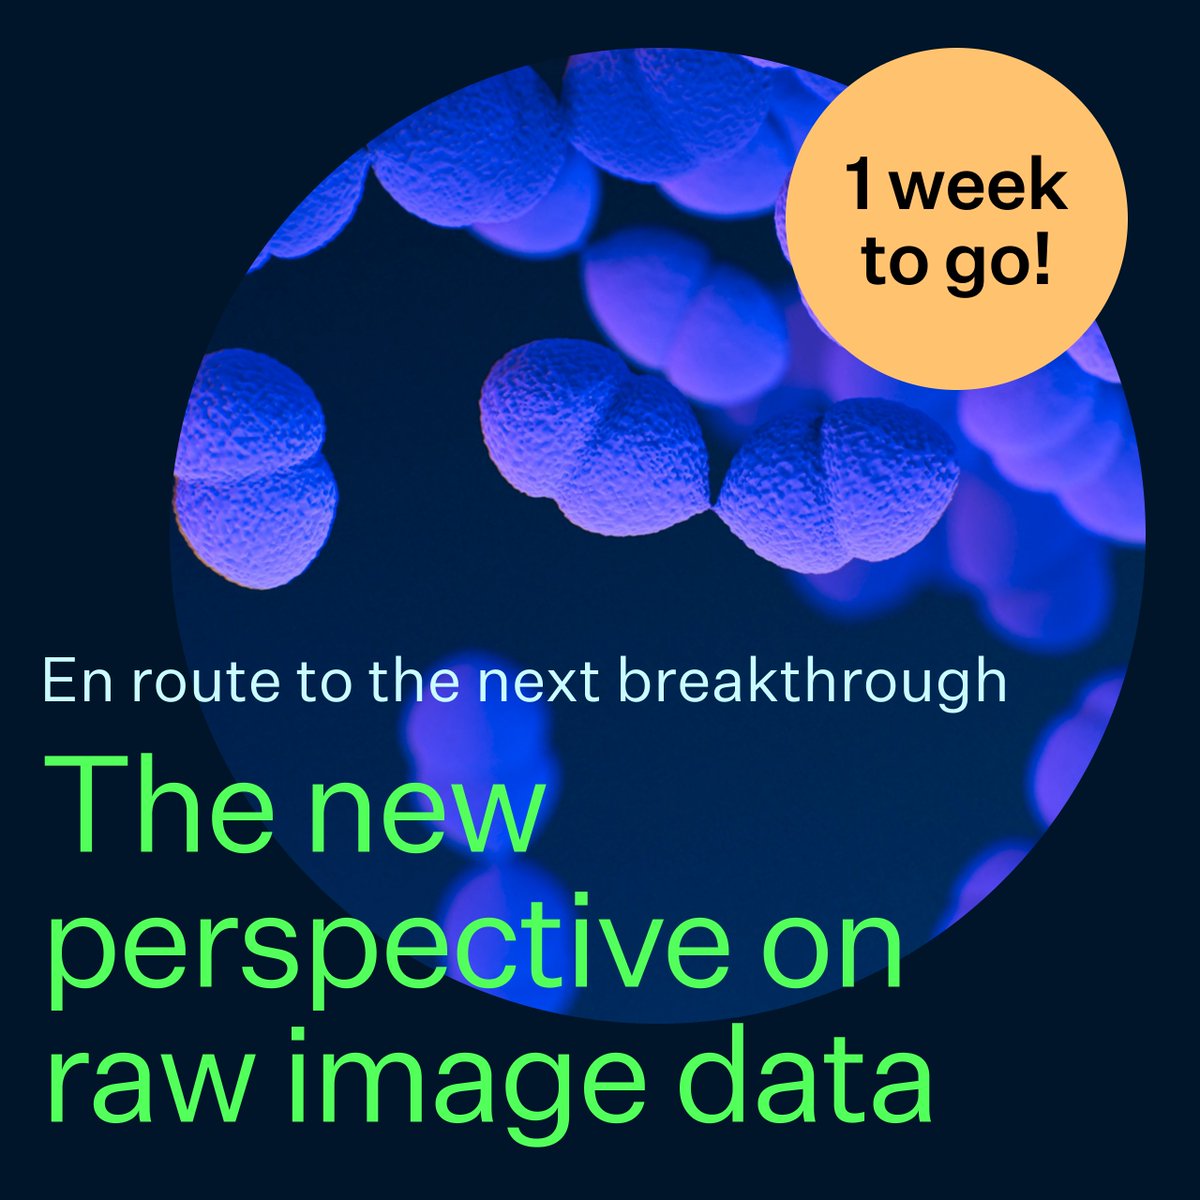 One week to go till our free webinar on big #imagedata - new perspective & latest approaches to overcome the issues around it. If you work in #microsocopy, #lightsheetmicroscopy, #imagery you'd highly benefit from this. Sign up to FREE TALK NEXT WEDNESDAY: linkedin.com/events/enroute…